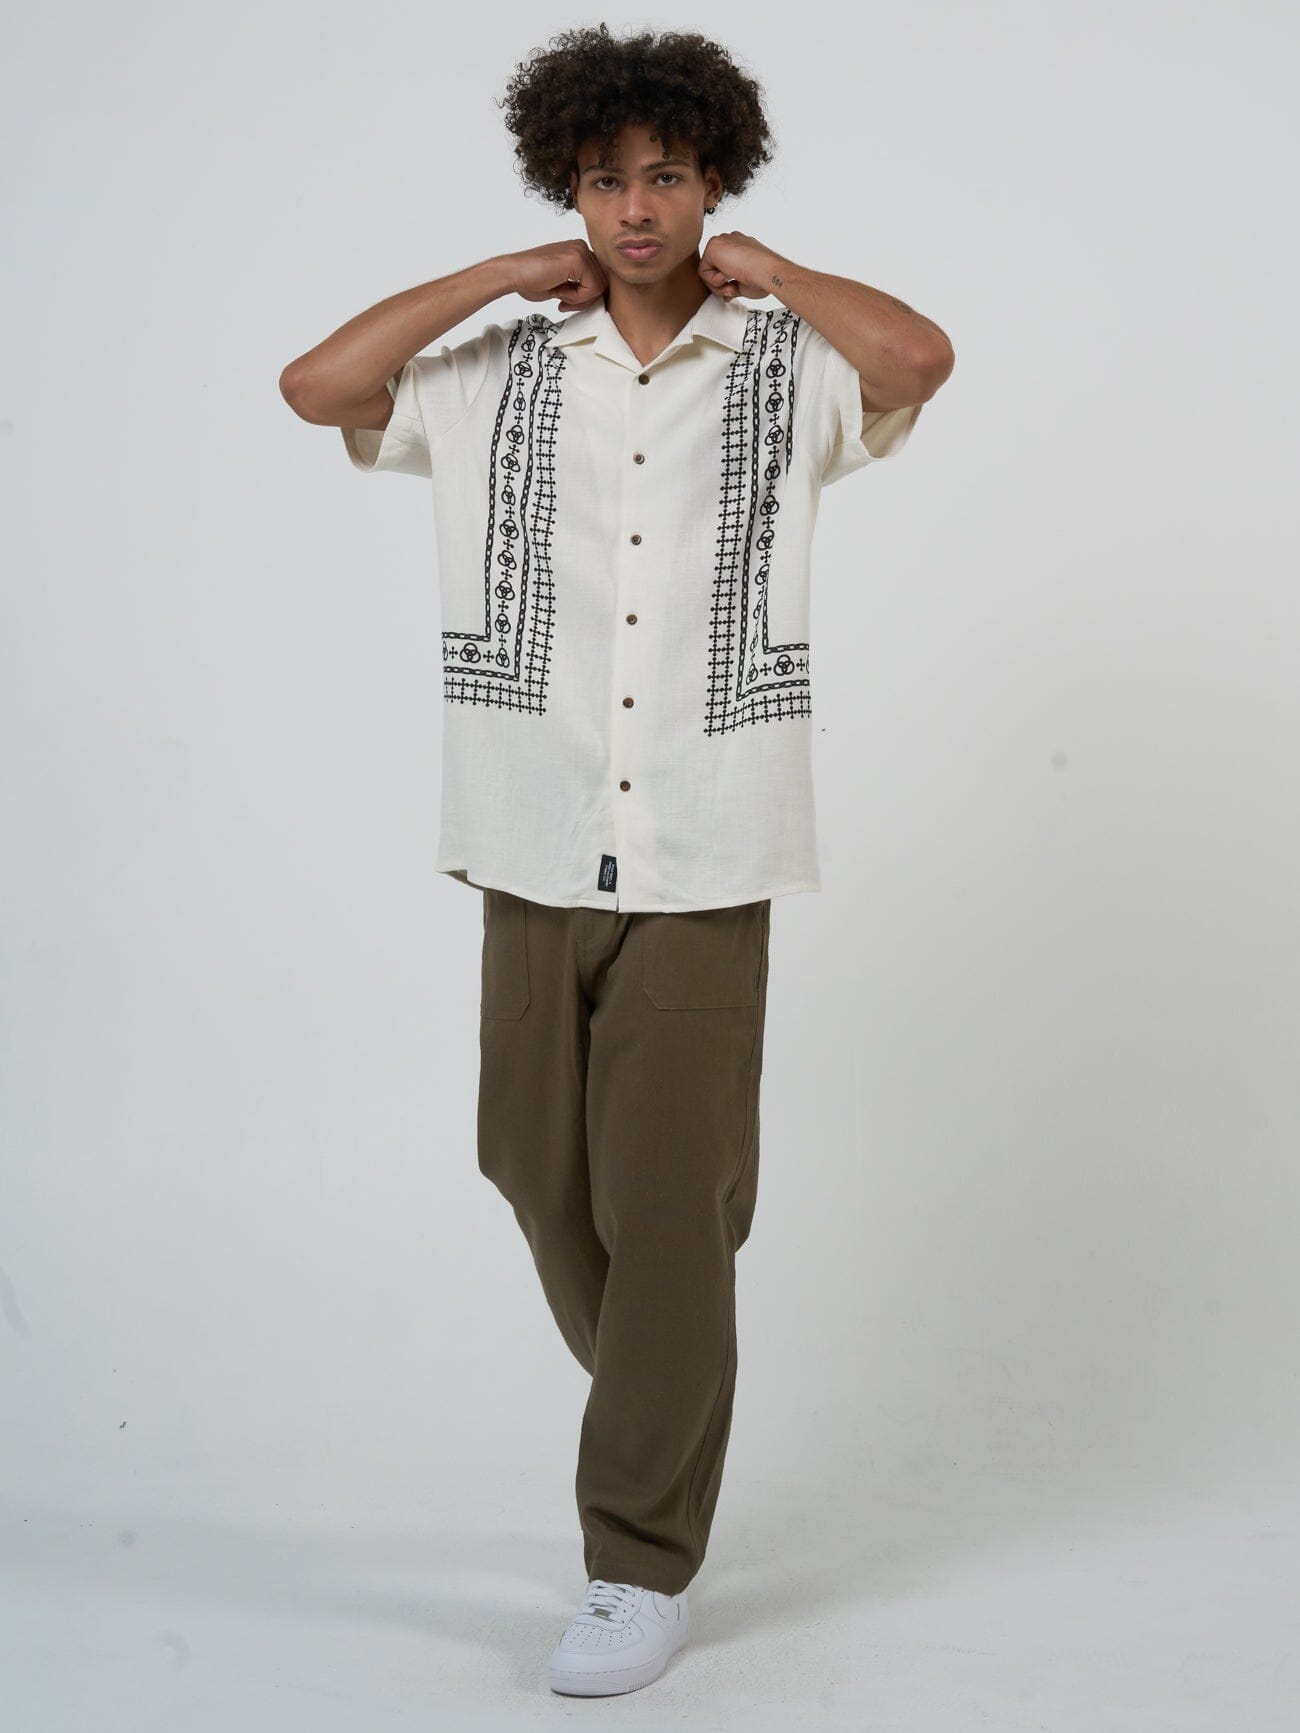 In Order and Disorder Bowling Shirt - Heritage White